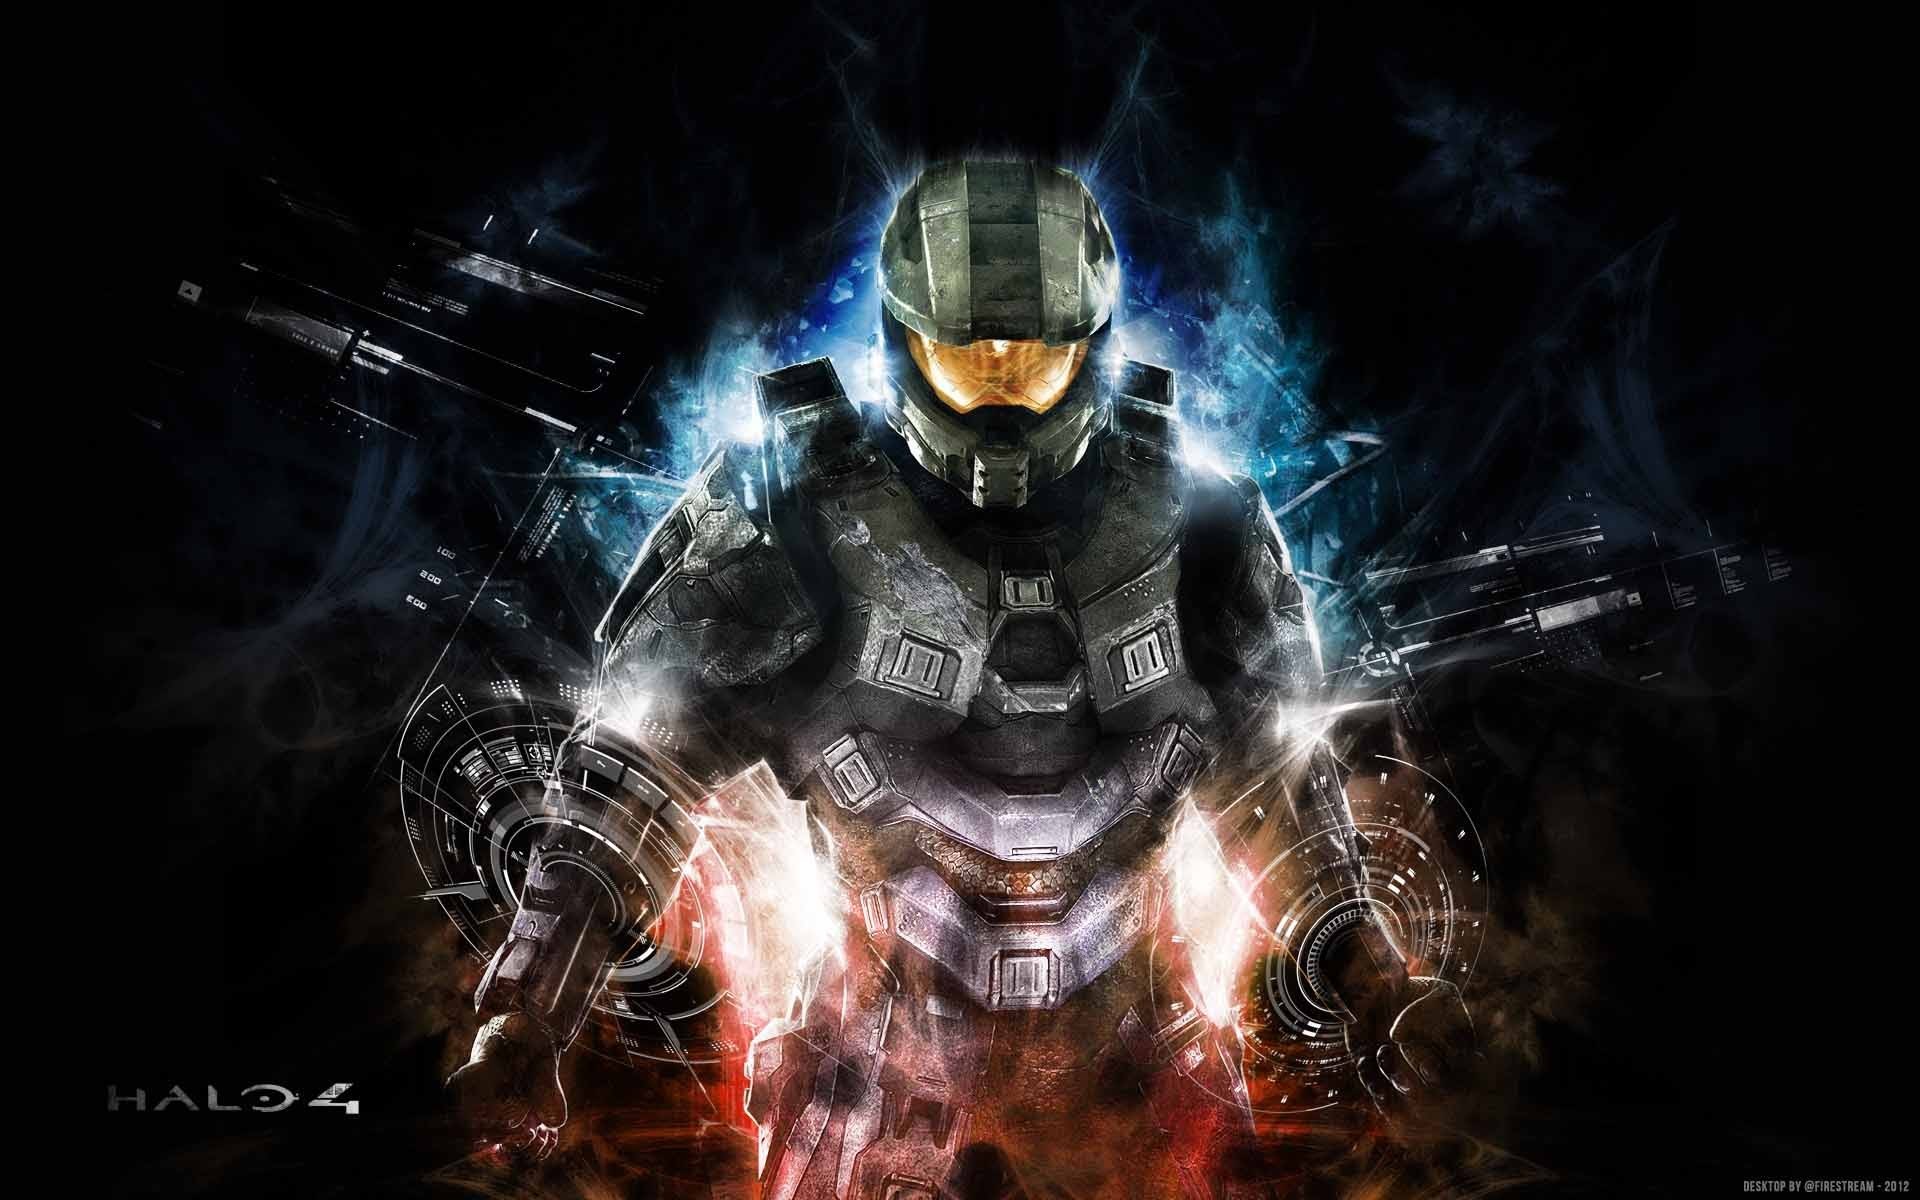 1920x1200 Similar Wallpapers. Halo, Master Chief, Halo 4, 343 Industries, Video  Games, Artwork